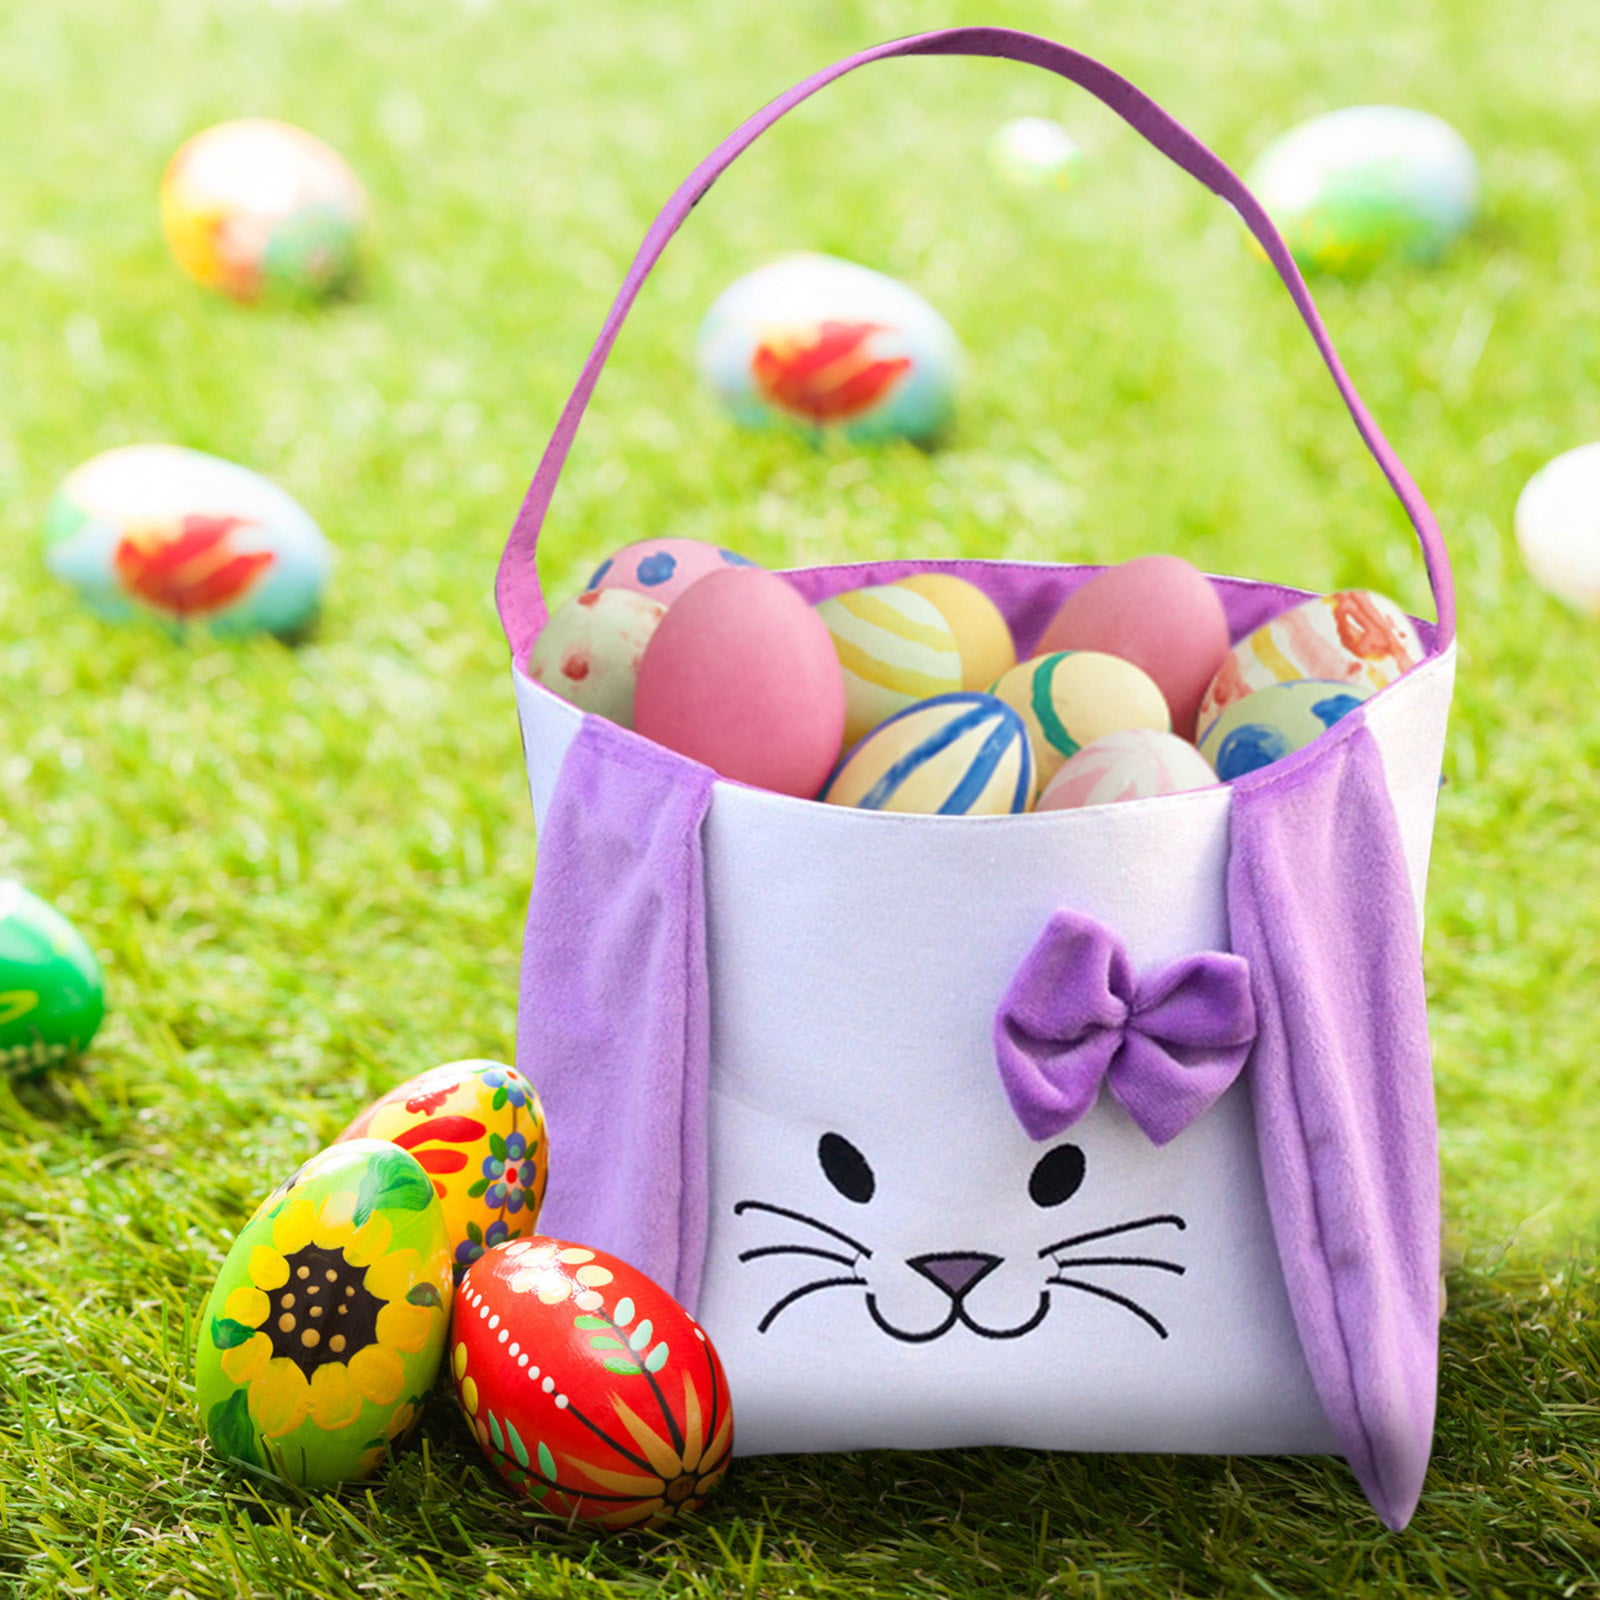 Spring Easter Baskets Hampers for Children Kids 2 PCS Easter Egg Hunt Baskets Easter Gifts Bags for Eggs Hunting Easter Bunny Bags with Handle Candy Chocolate Egg Carry Bucket at Easter Party